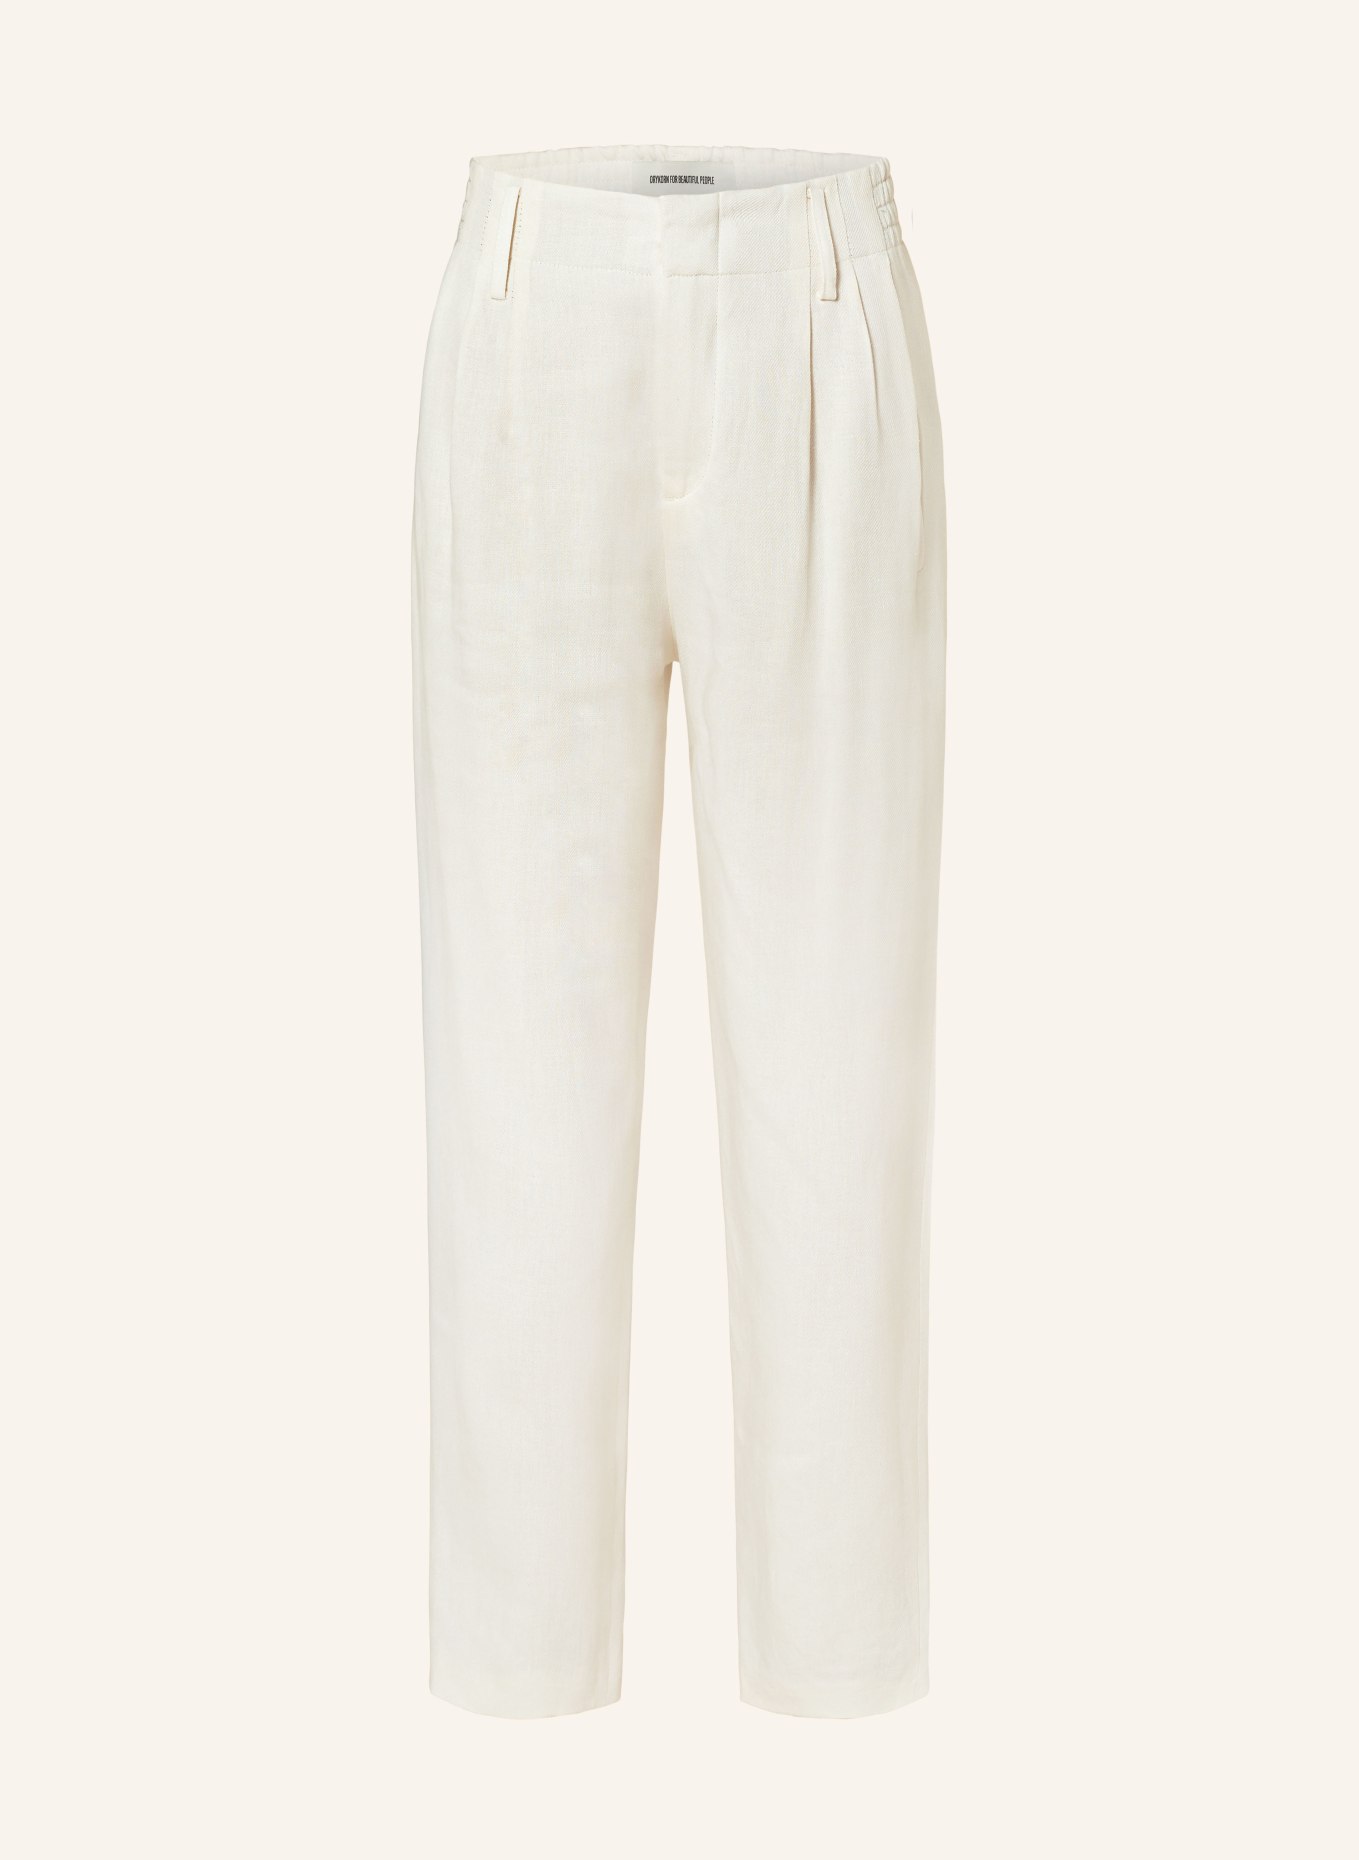 DRYKORN 7/8 trousers DISPATCH with linen, Color: ECRU (Image 1)